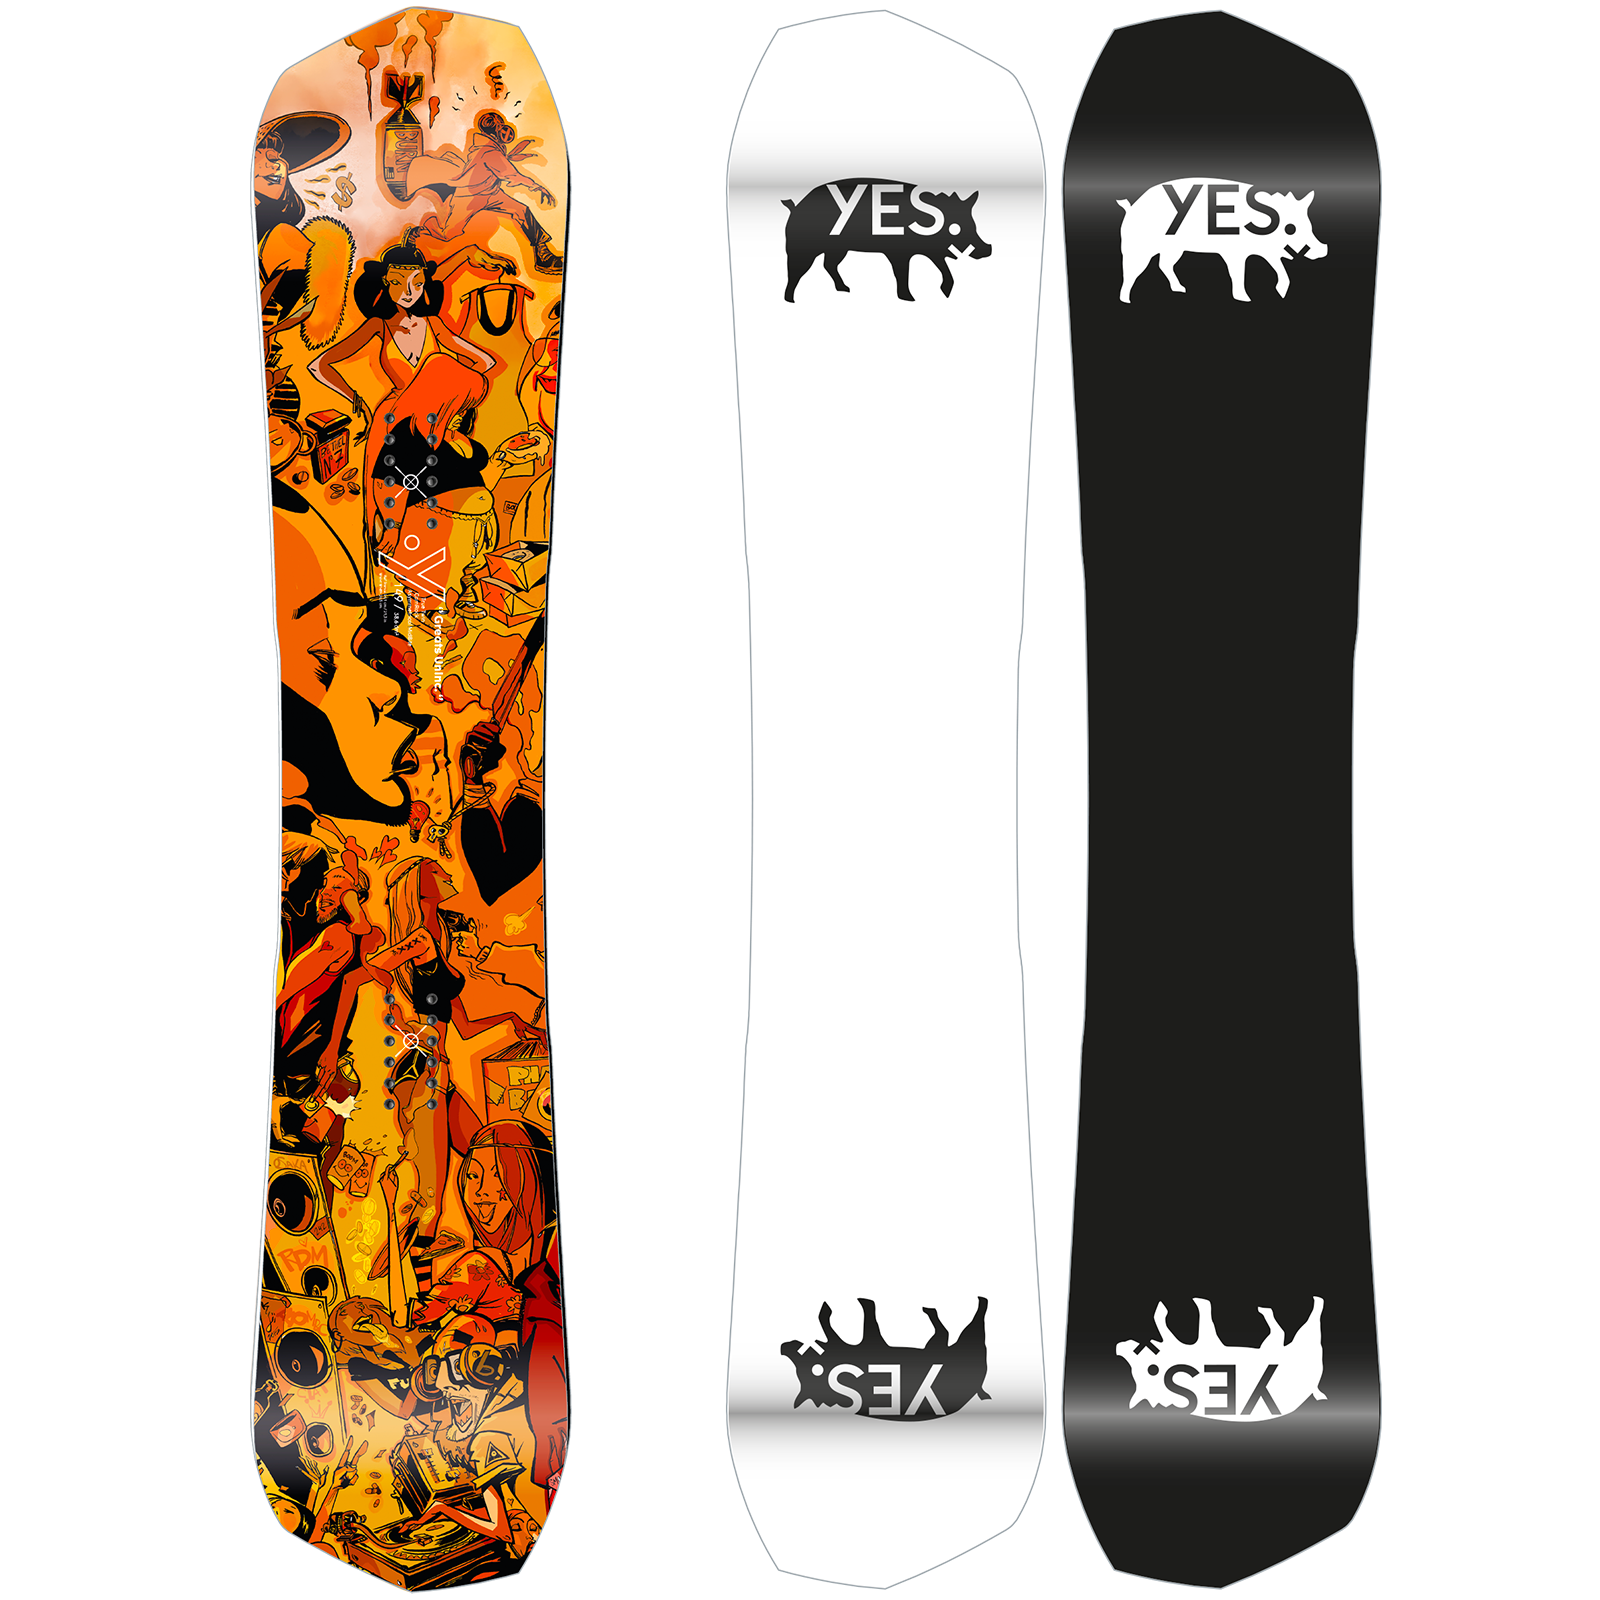 The Yes Greats Uninc Snowboard